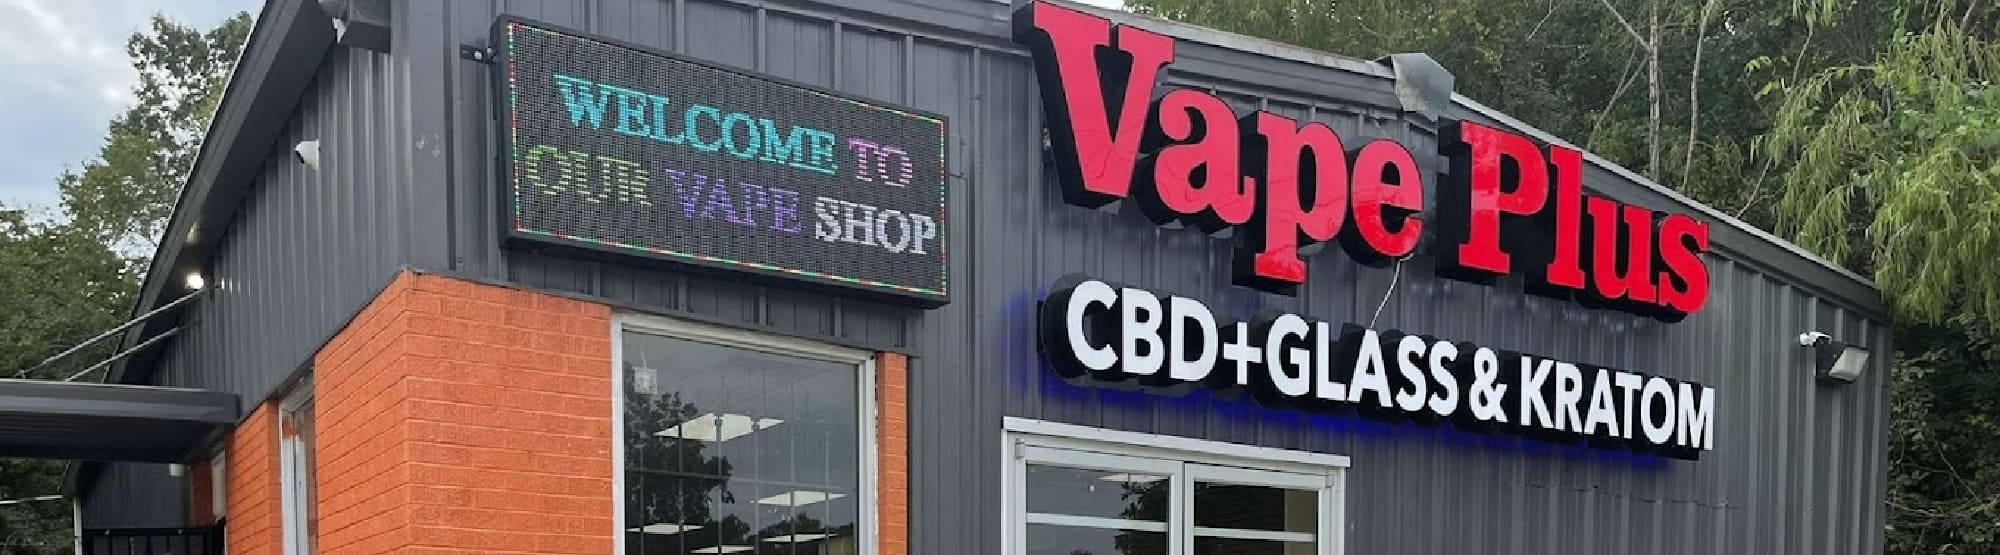 image of vape plus where you can Buy Kratom in Meridian Mississippi